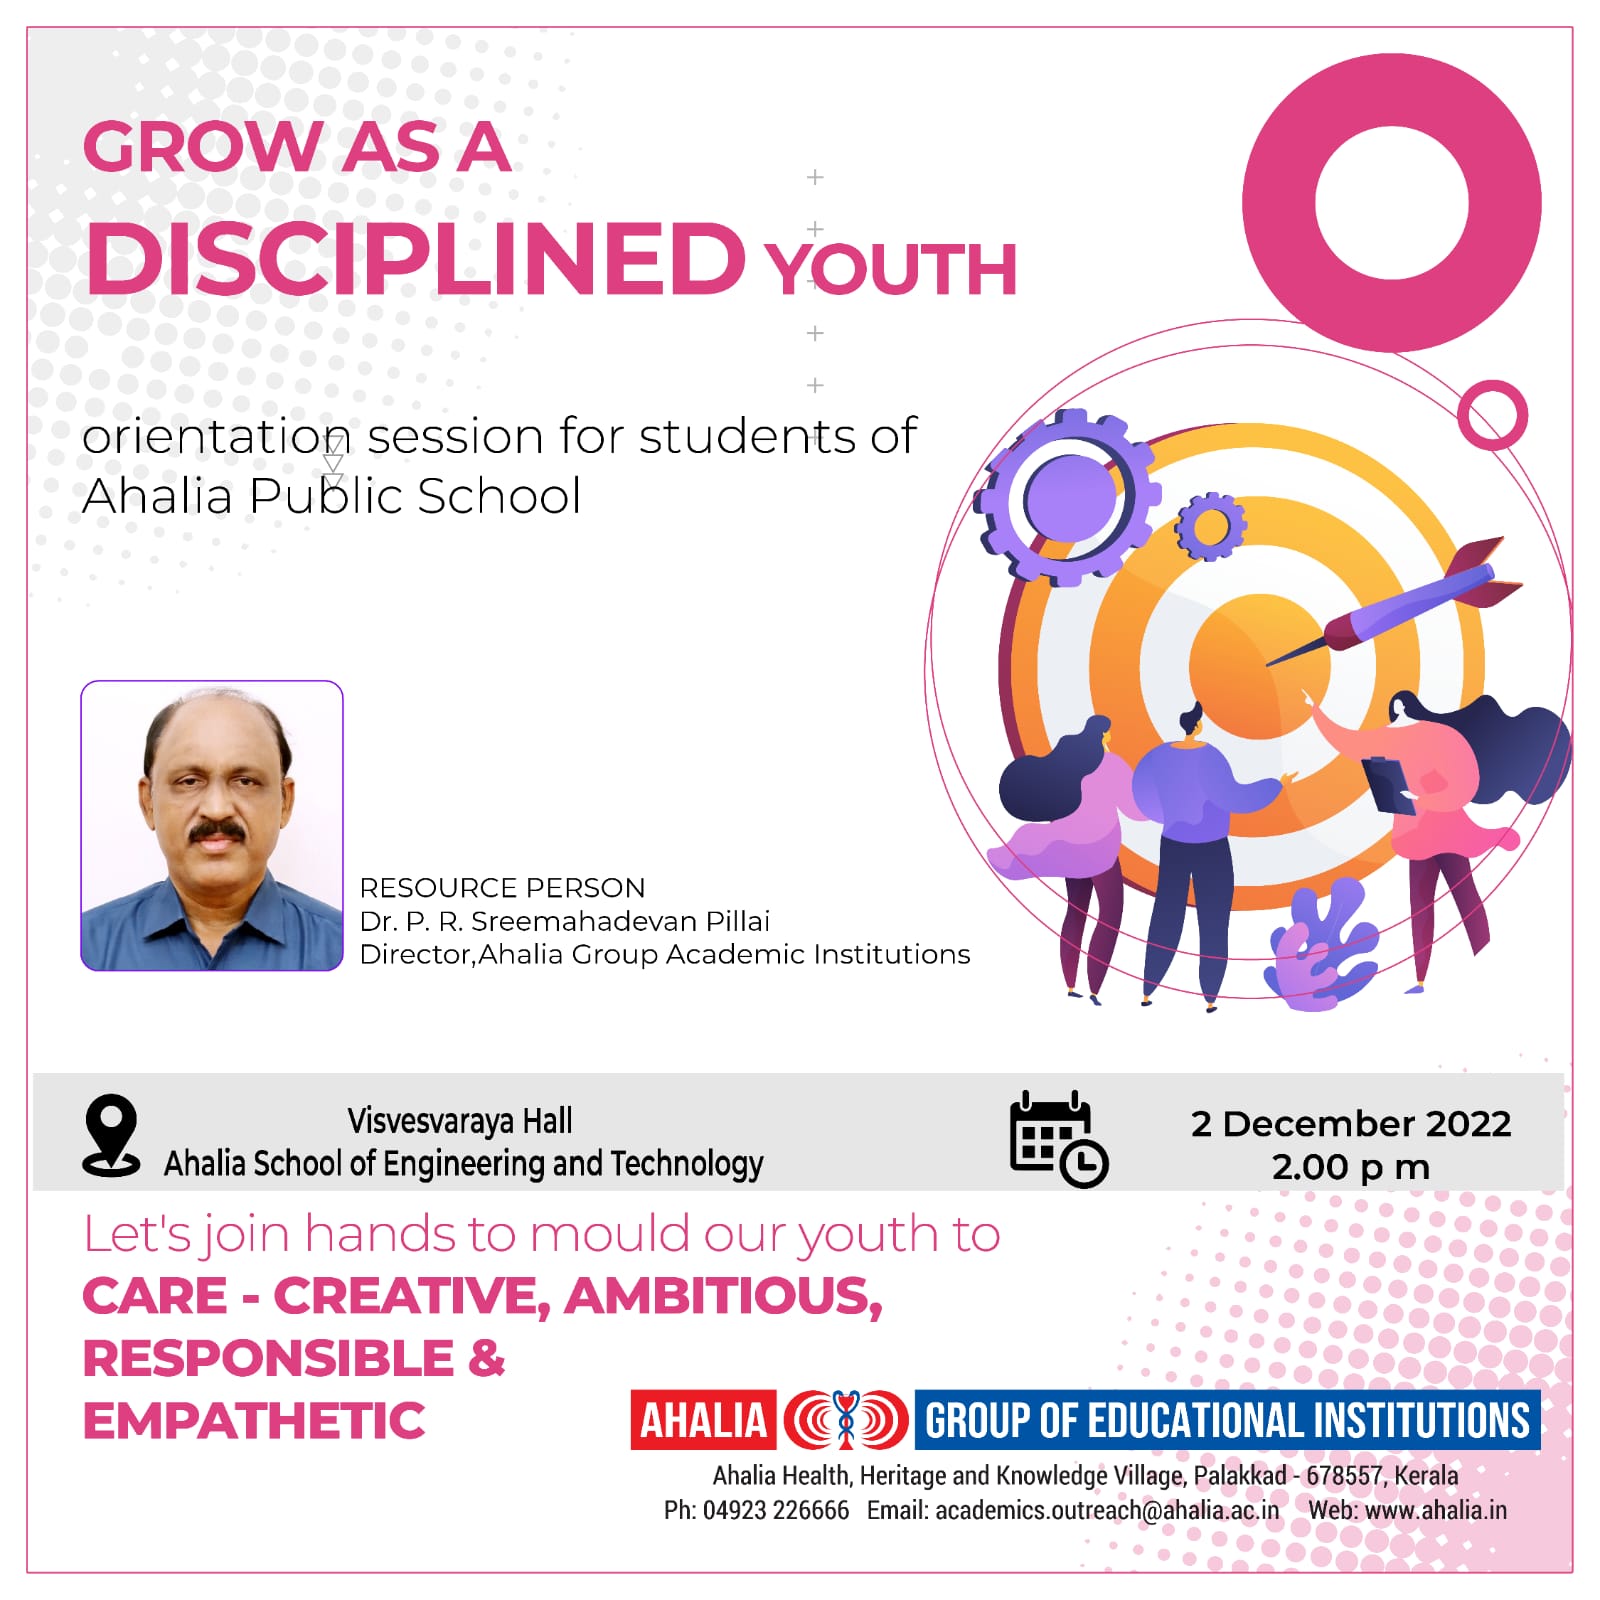 Session on ‘Grow as a Disciplined Youth’ for Ahalia Public School